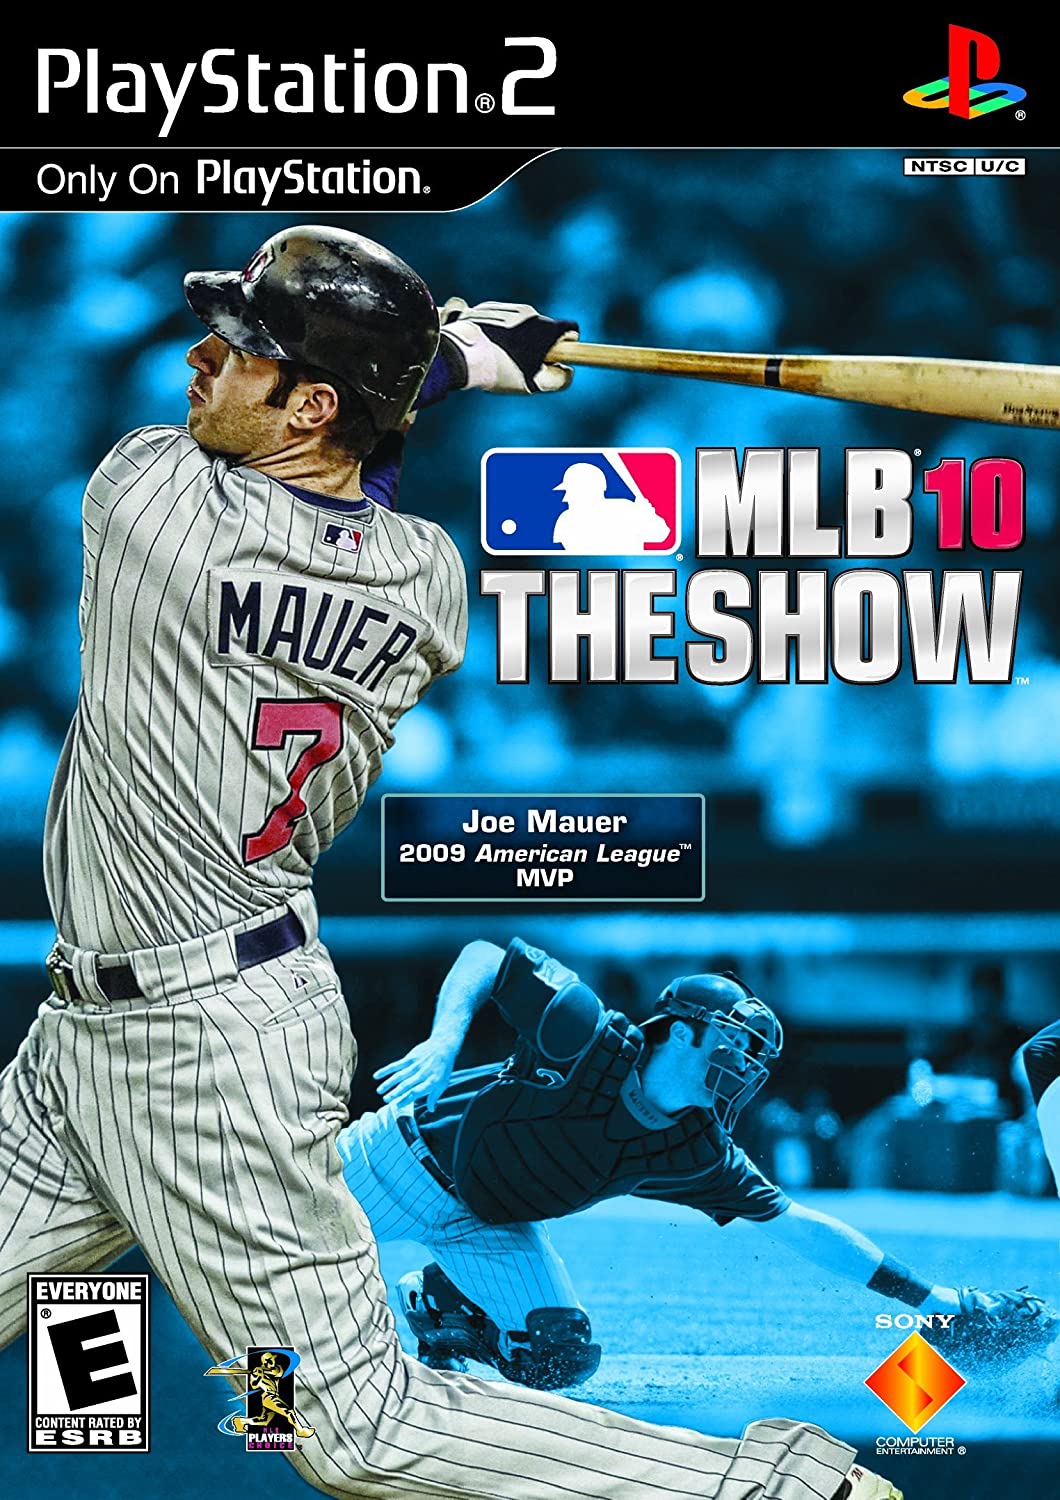 Will Joe Mauer Get Into the Hall of Fame?, most valuable player award,  ticket, Cooperstown